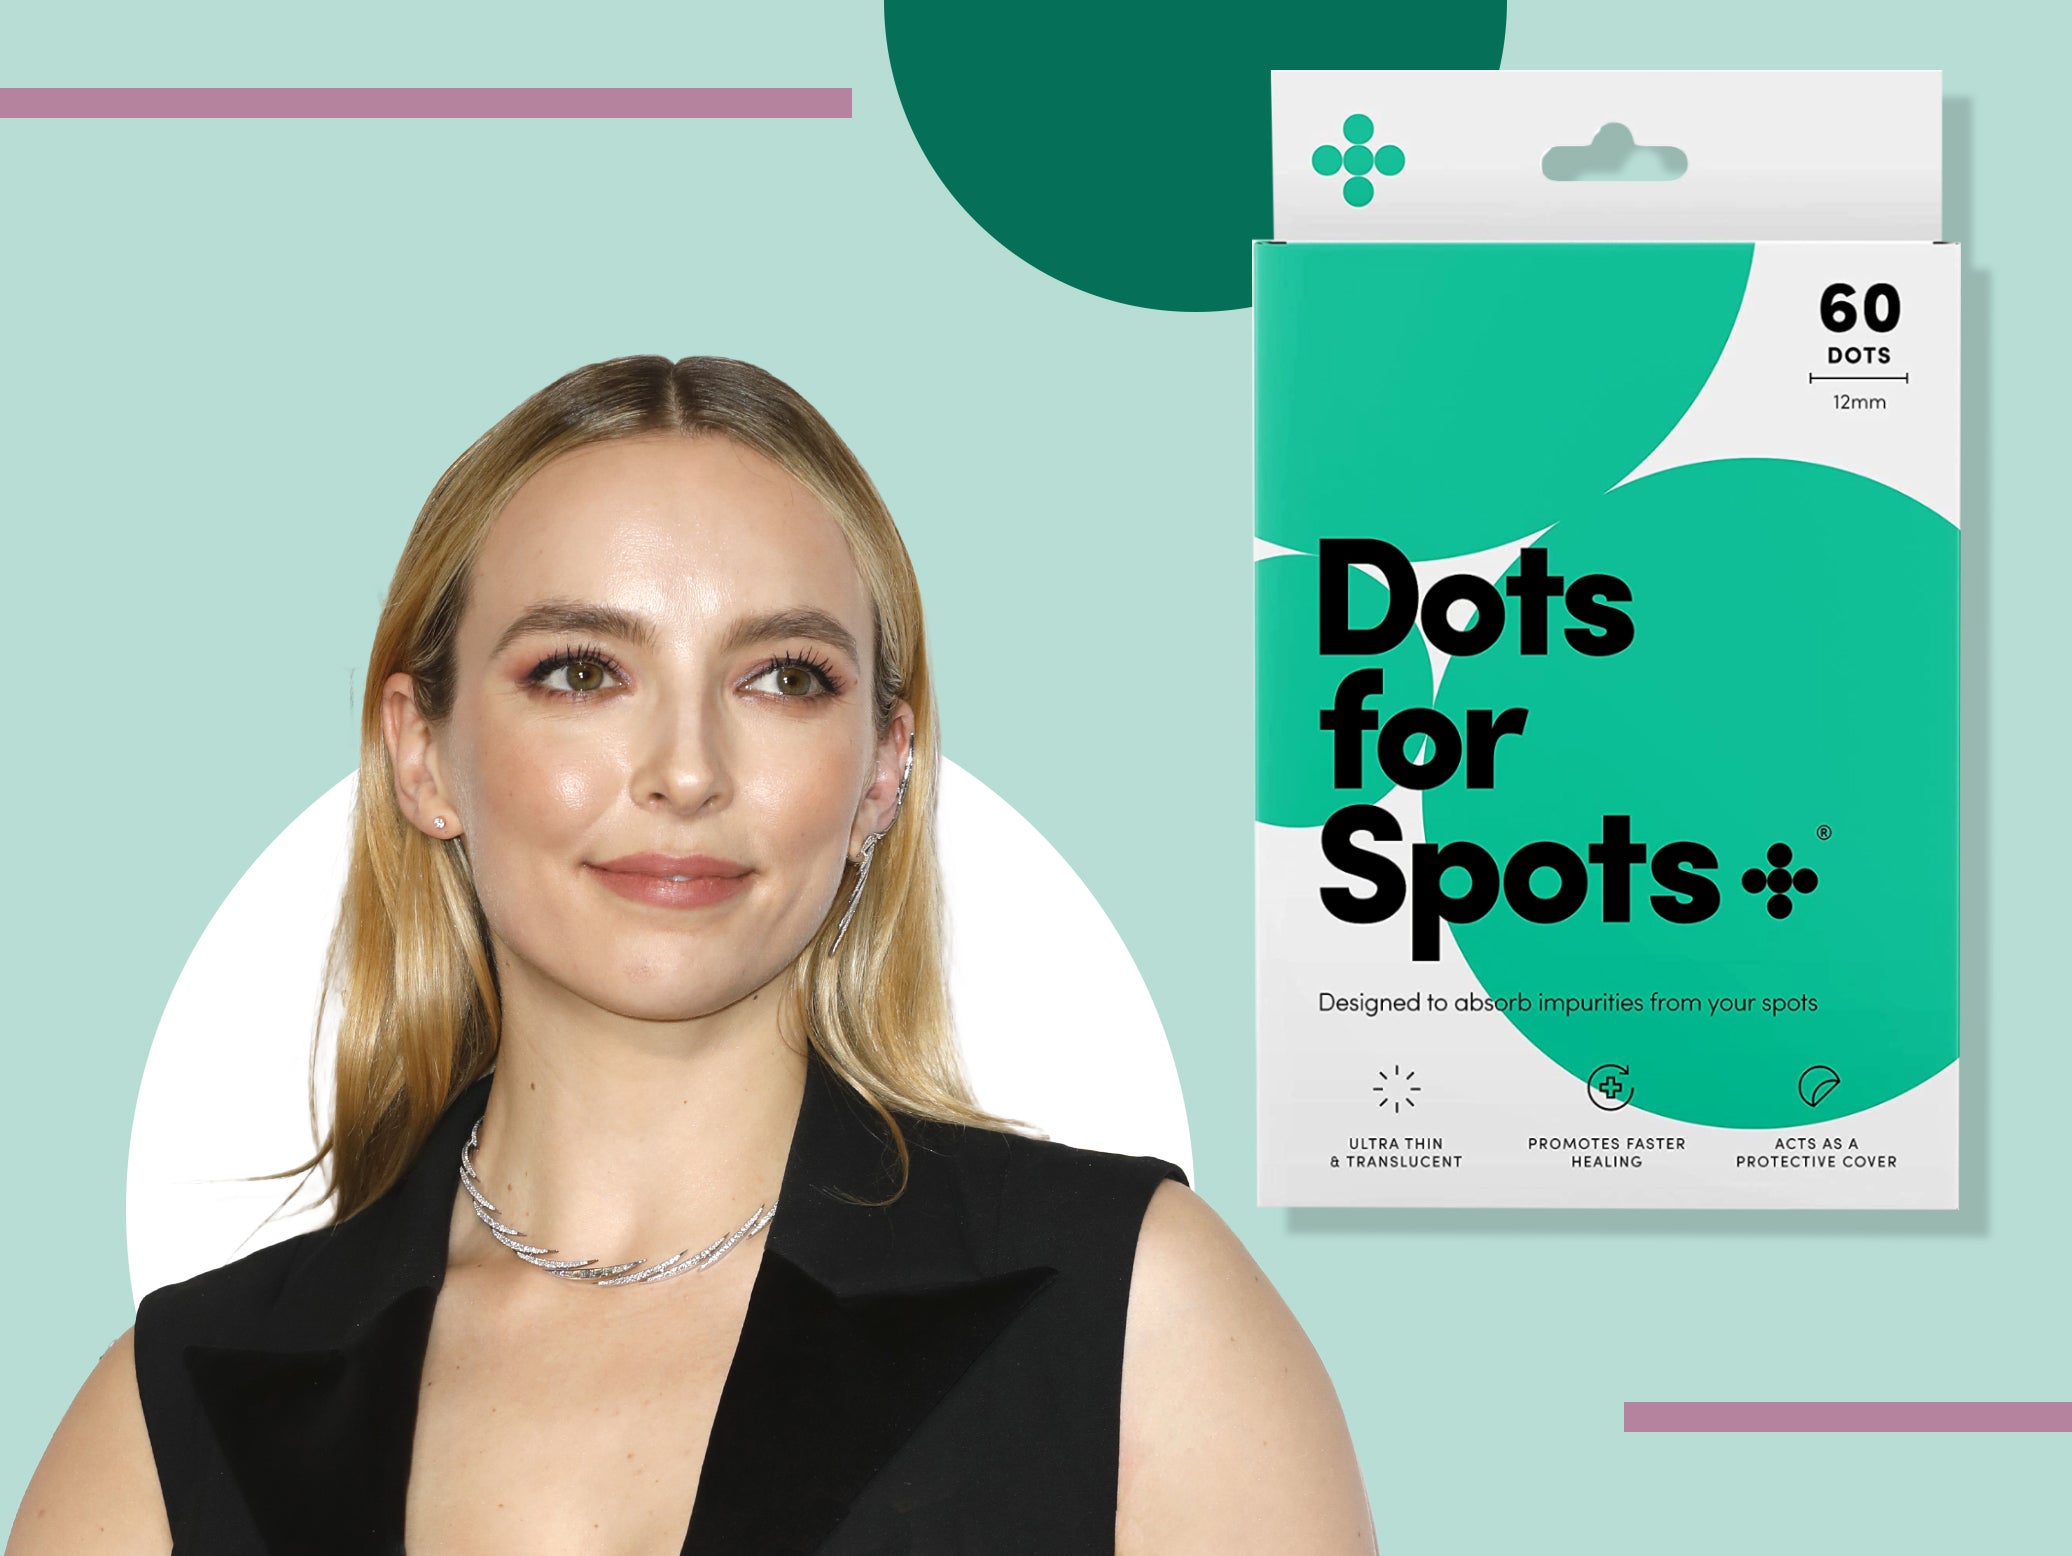 The celebrity approved spot dots have been announced